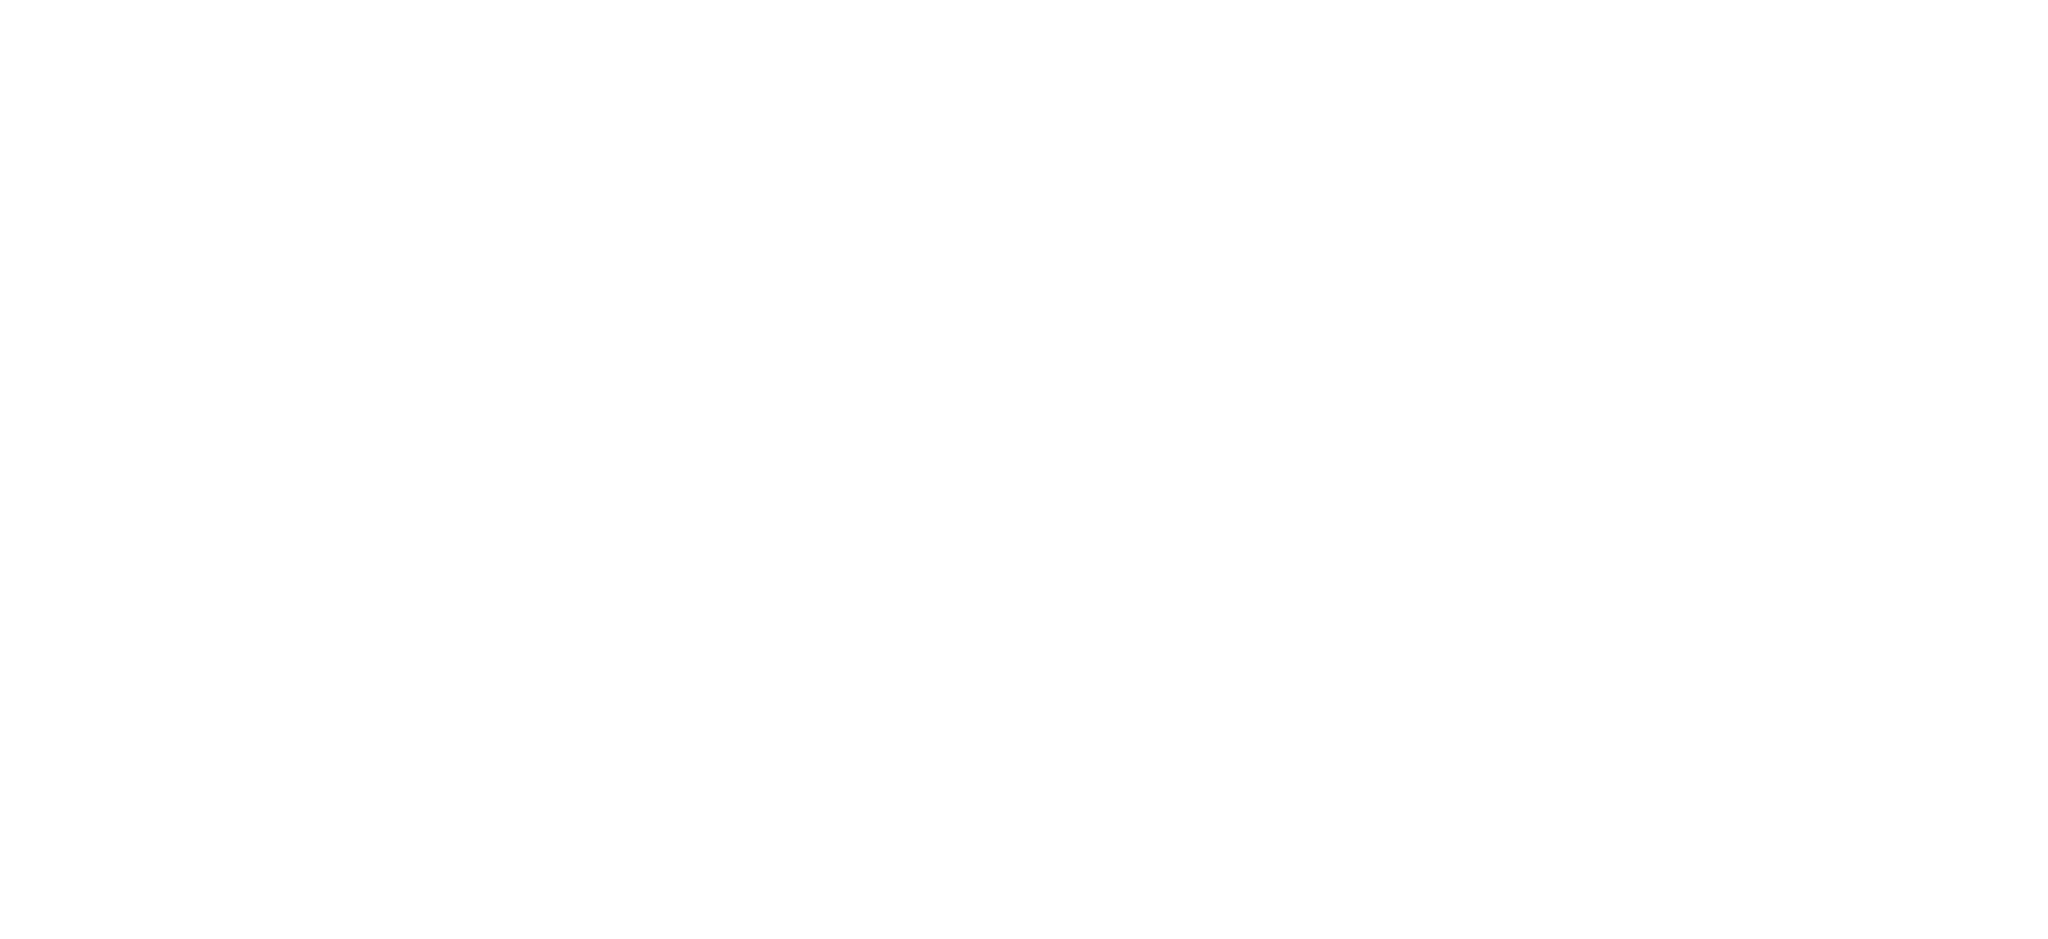 Advanced Graphic Engraving